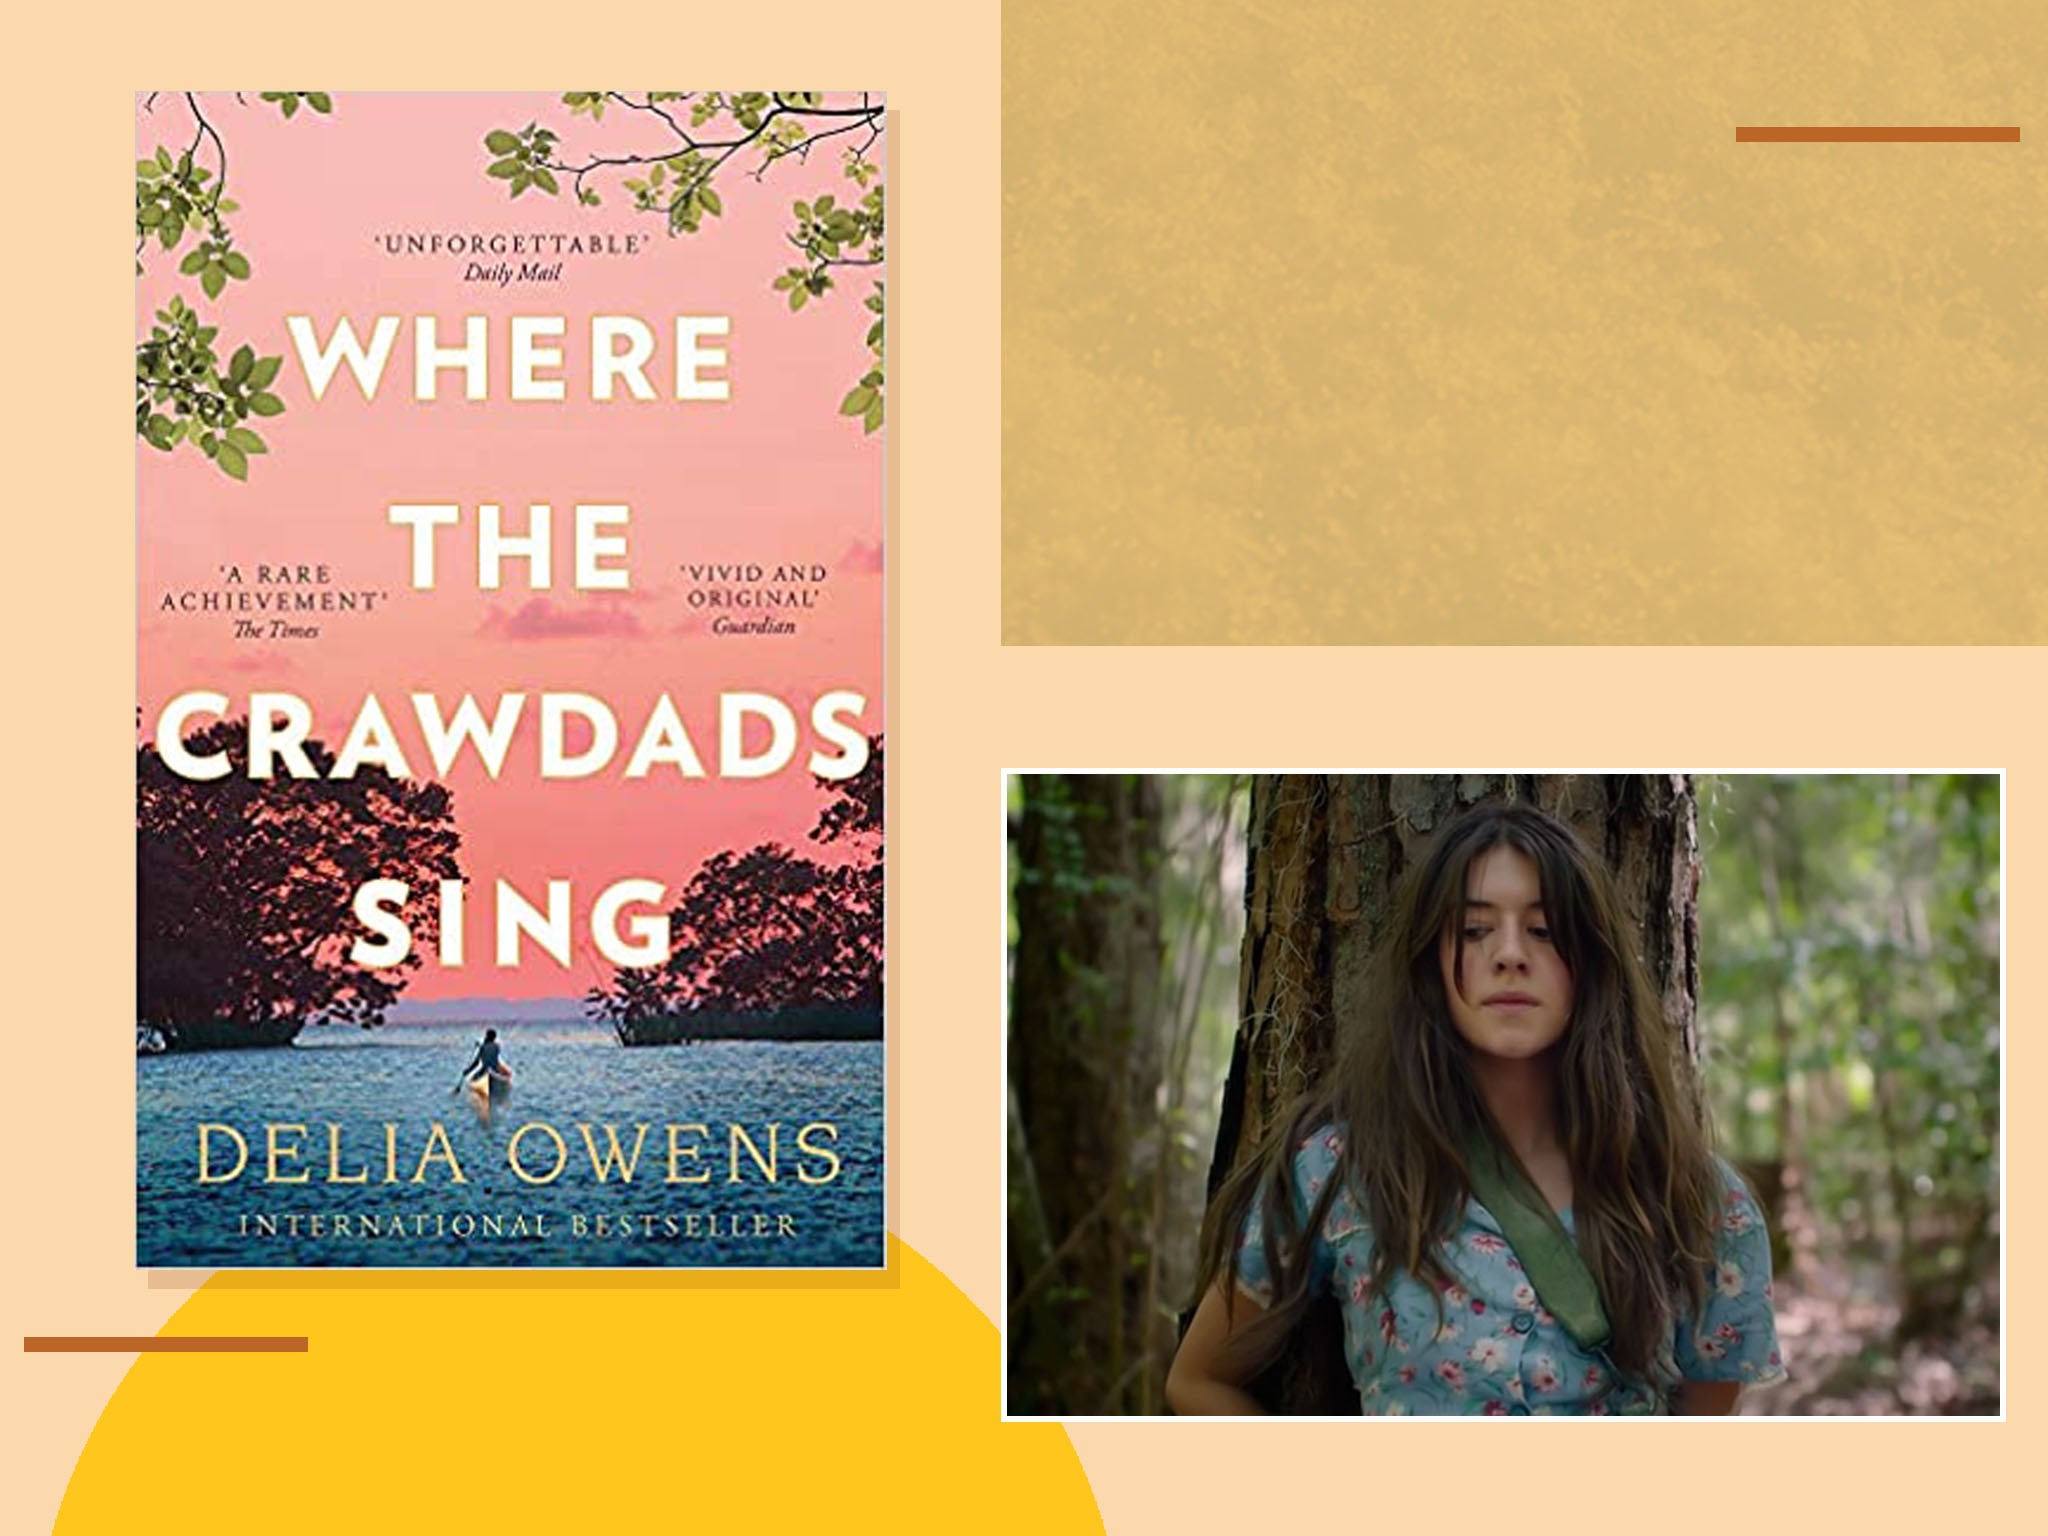 Where the Crawdads Sing is in cinemas now – but this is the book behind the new film